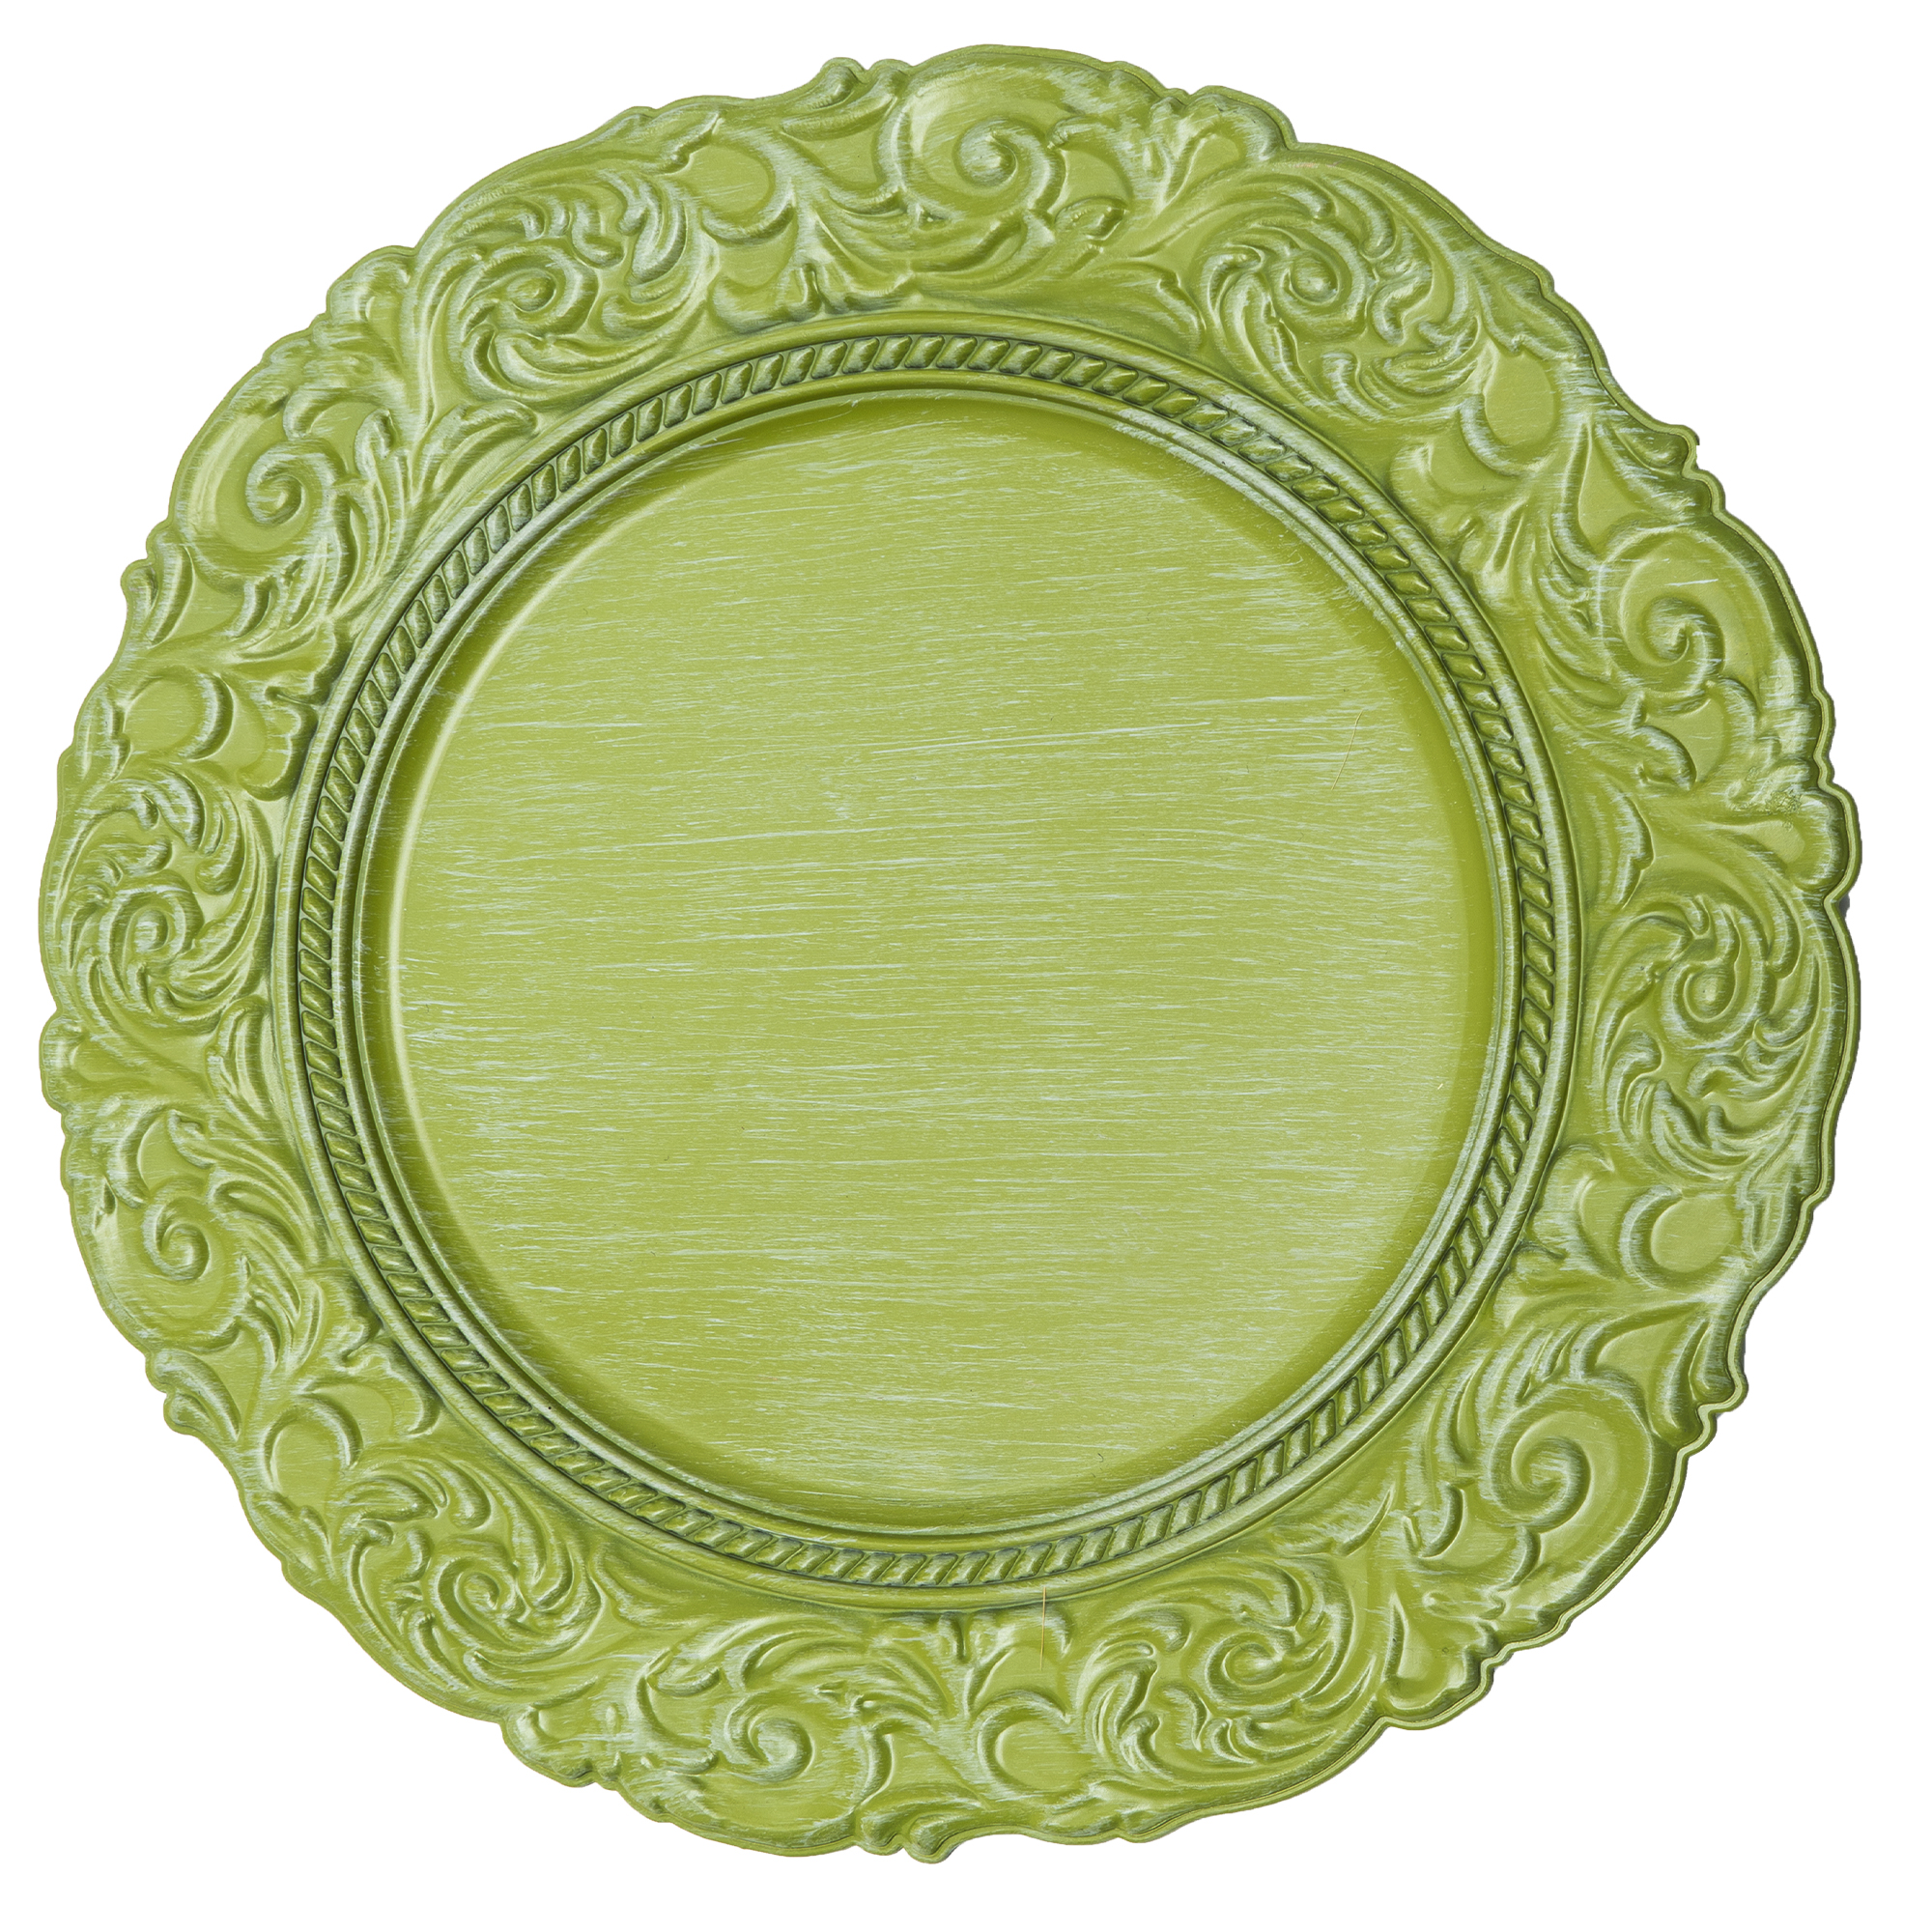 Antique Look Plastic Charger Plate 14" - Green